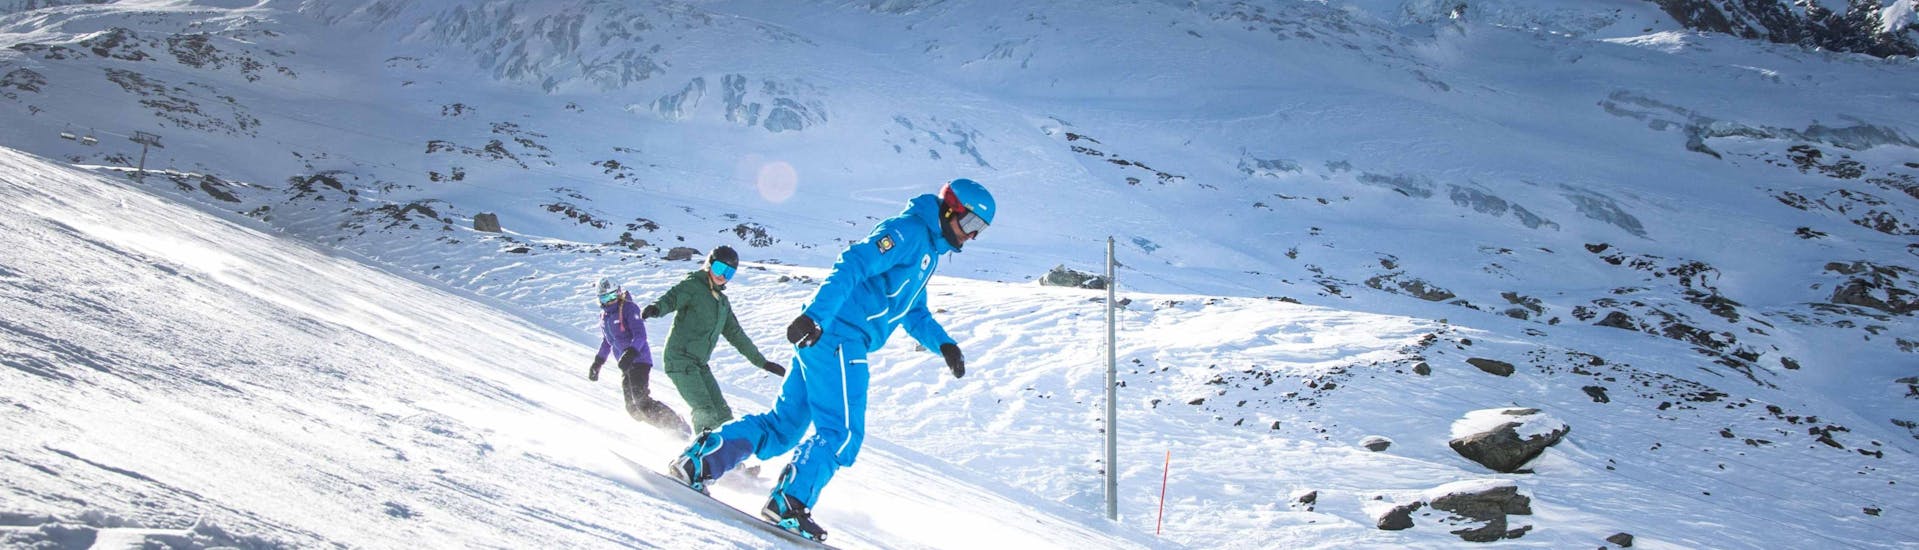 Discovery Snowboarding Lessons for Adults for First Timers with Ski School ESKIMOS Saas-Fee - Hero image